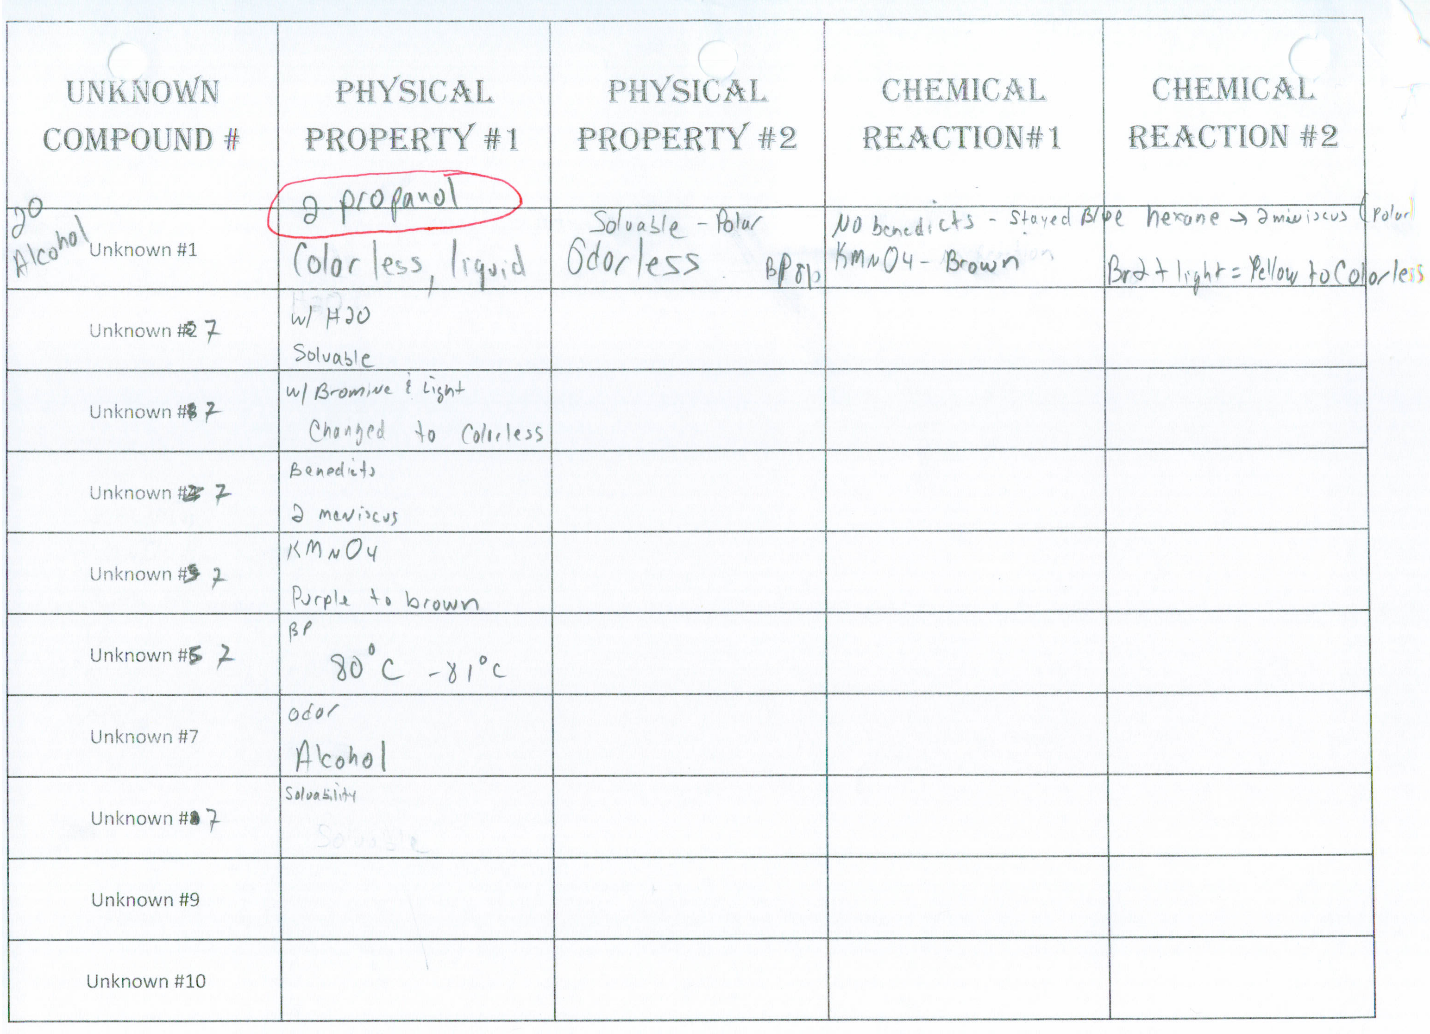 A summary of the physical properties and chemical reactions of the unknown compound